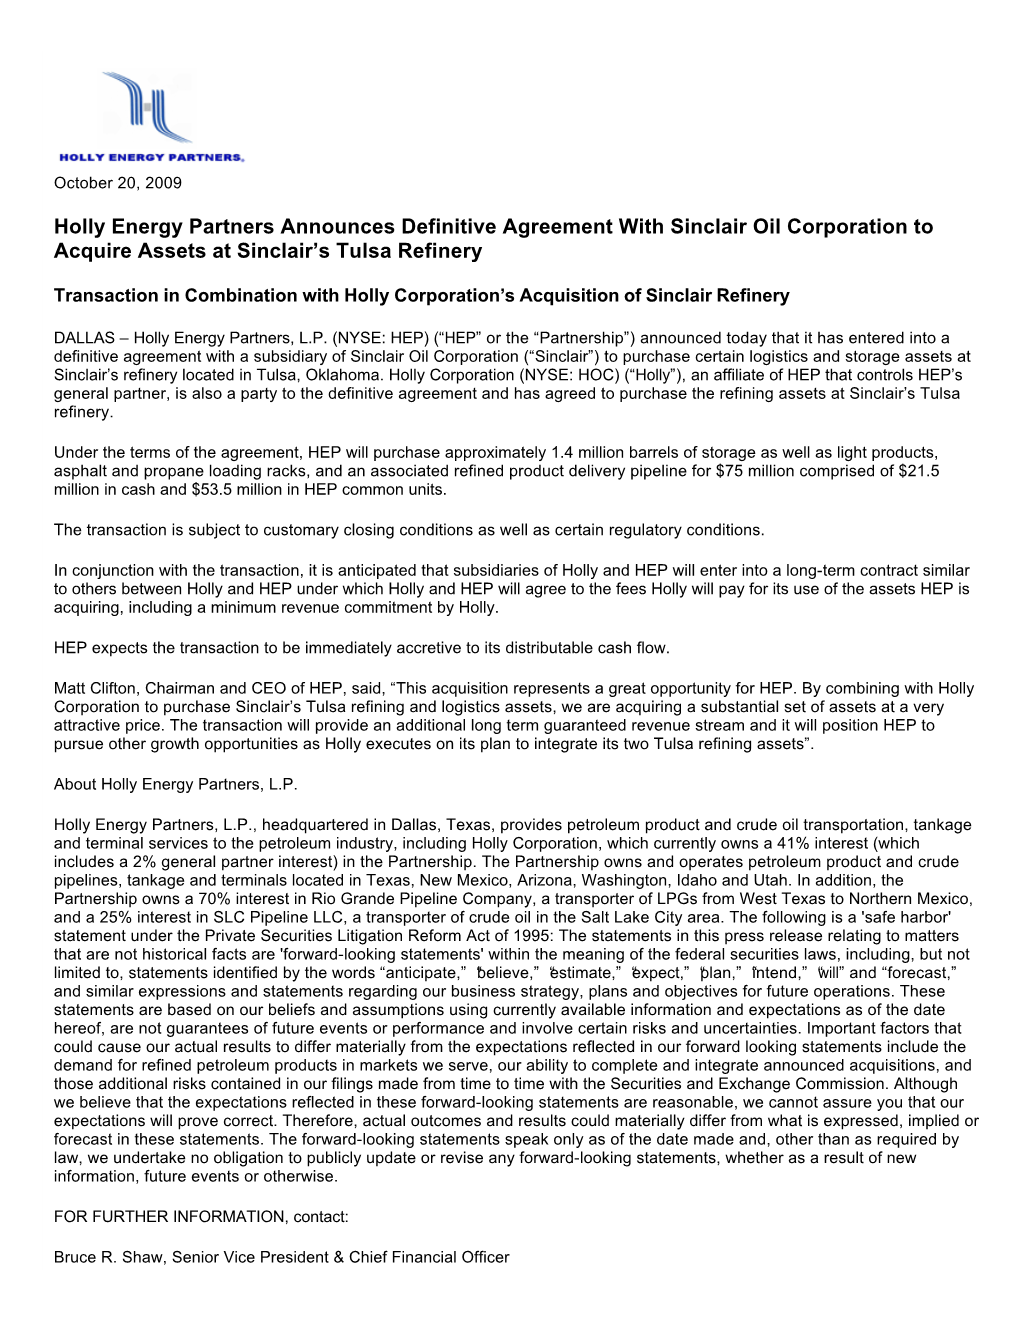 Holly Energy Partners Announces Definitive Agreement with Sinclair Oil Corporation to Acquire Assets at Sinclair's Tulsa Refin